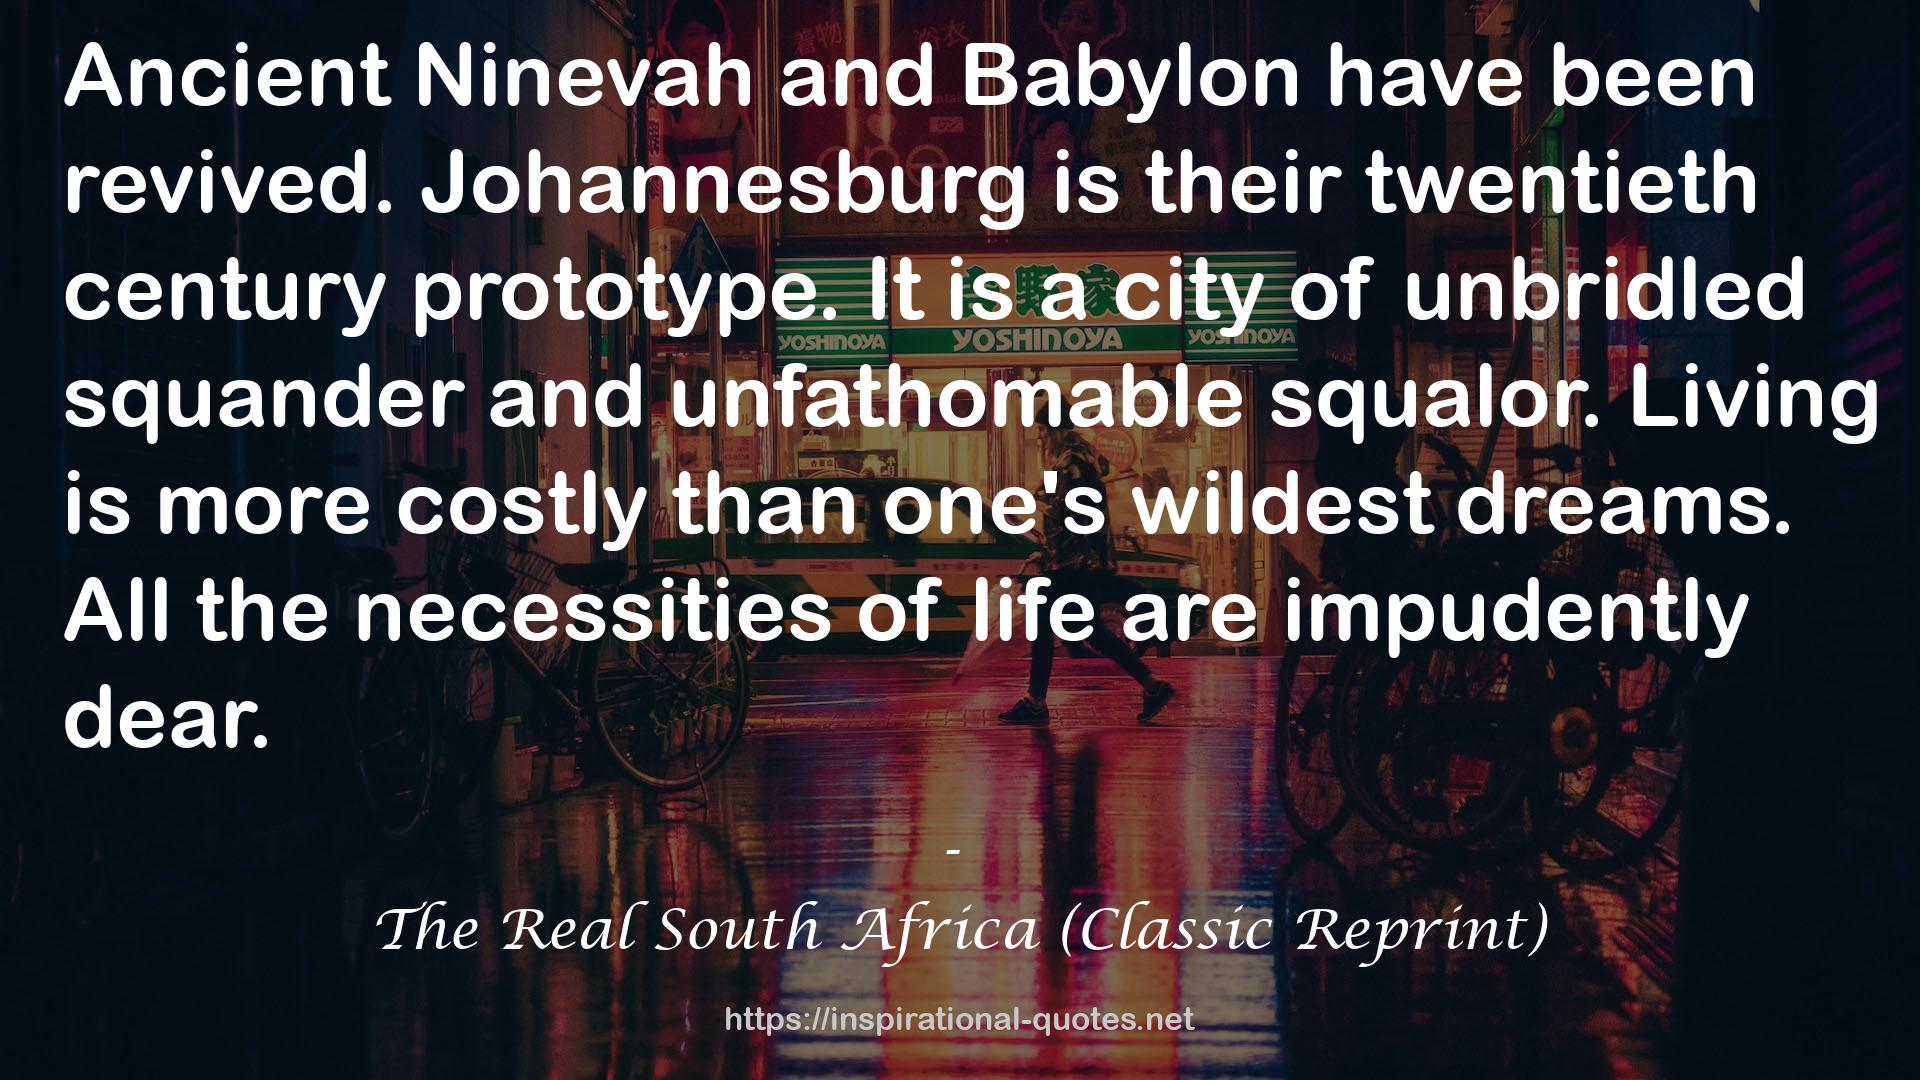 The Real South Africa (Classic Reprint) QUOTES